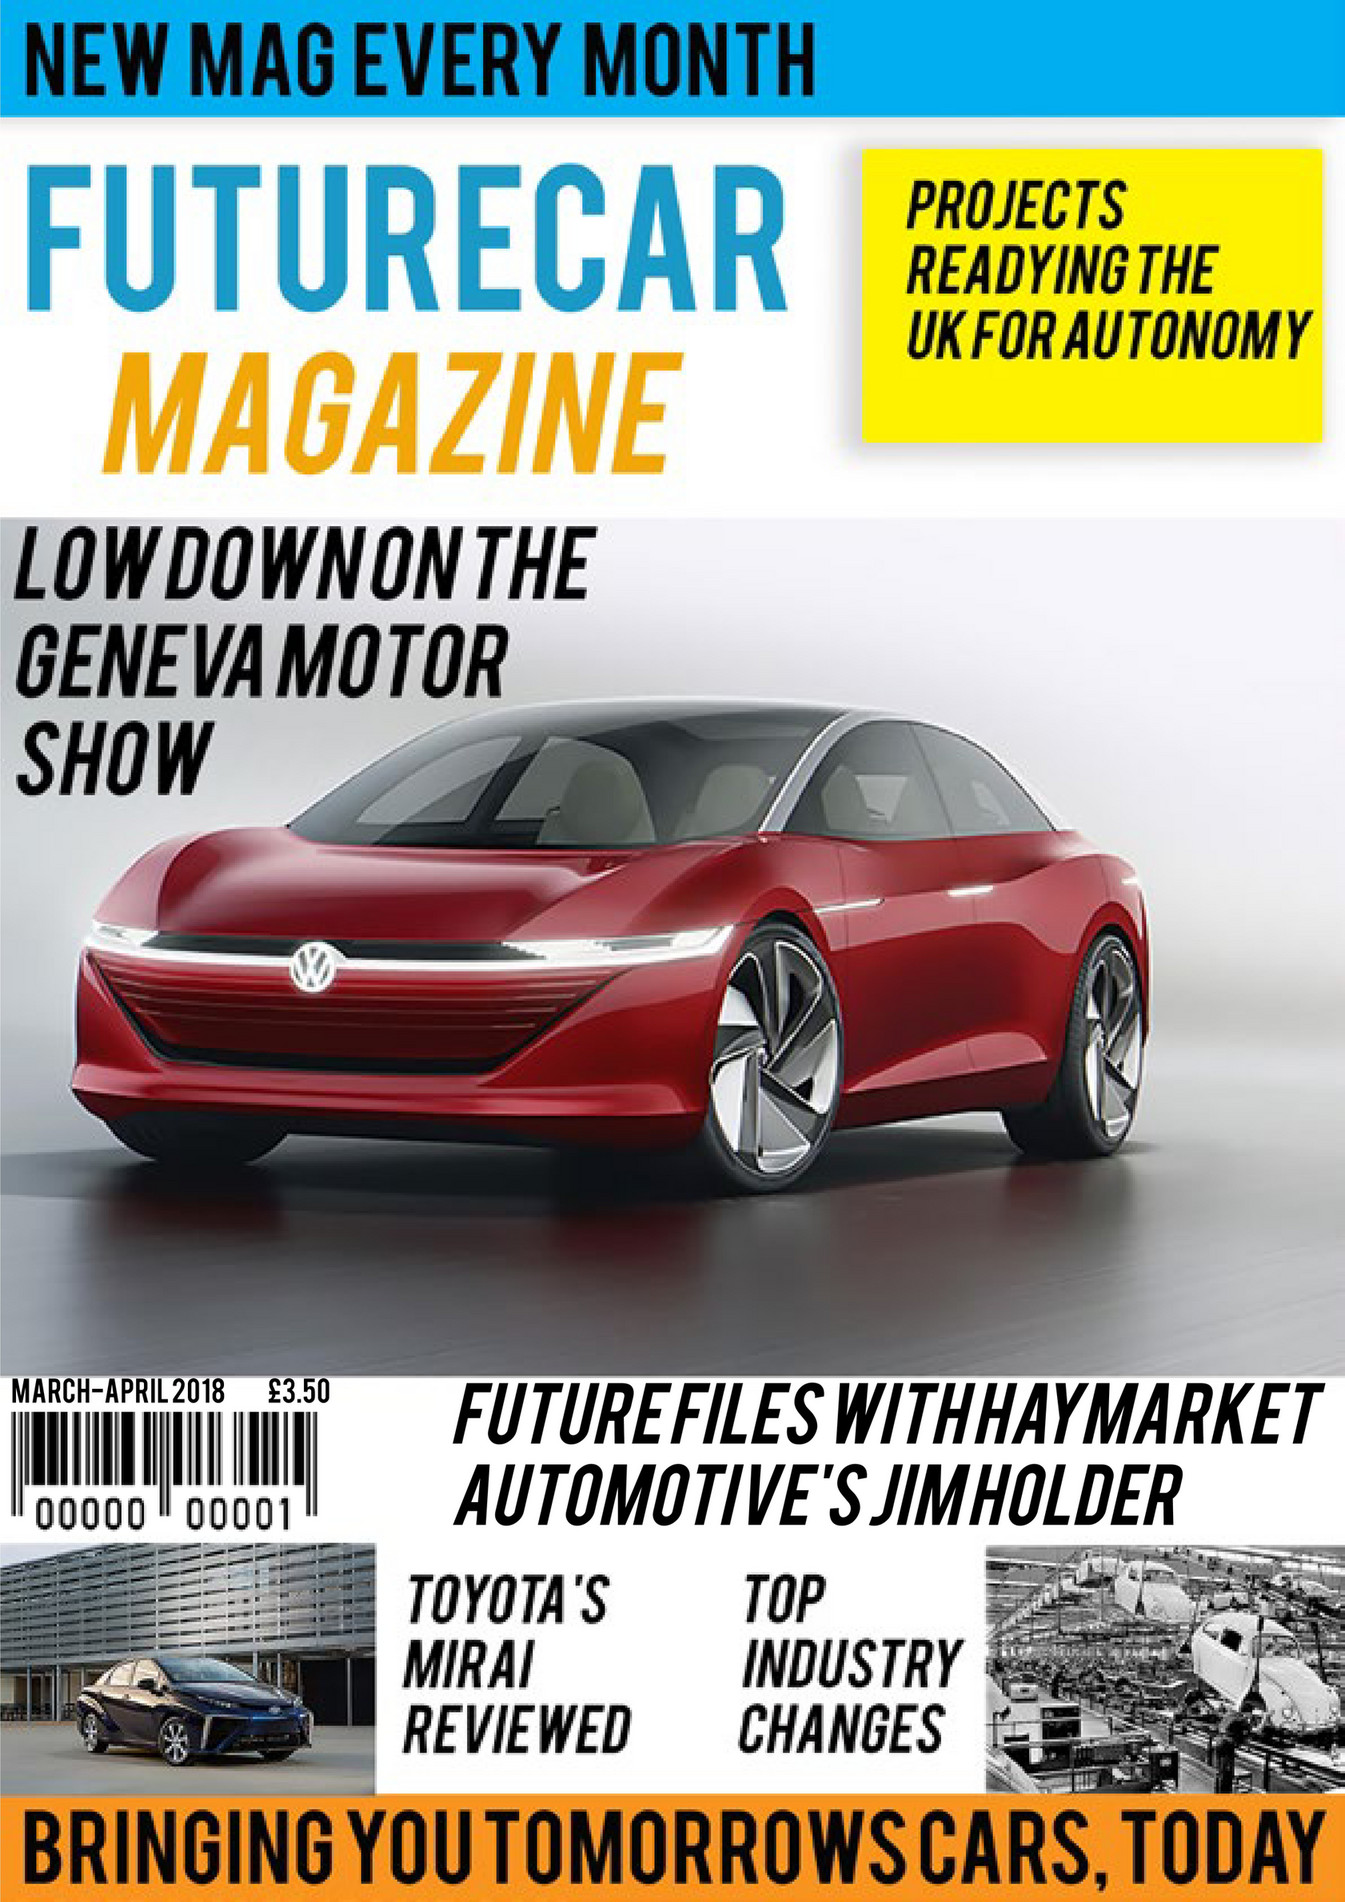 Final Project - Future Car Magazine - Page 1 - Created with Publitas.com